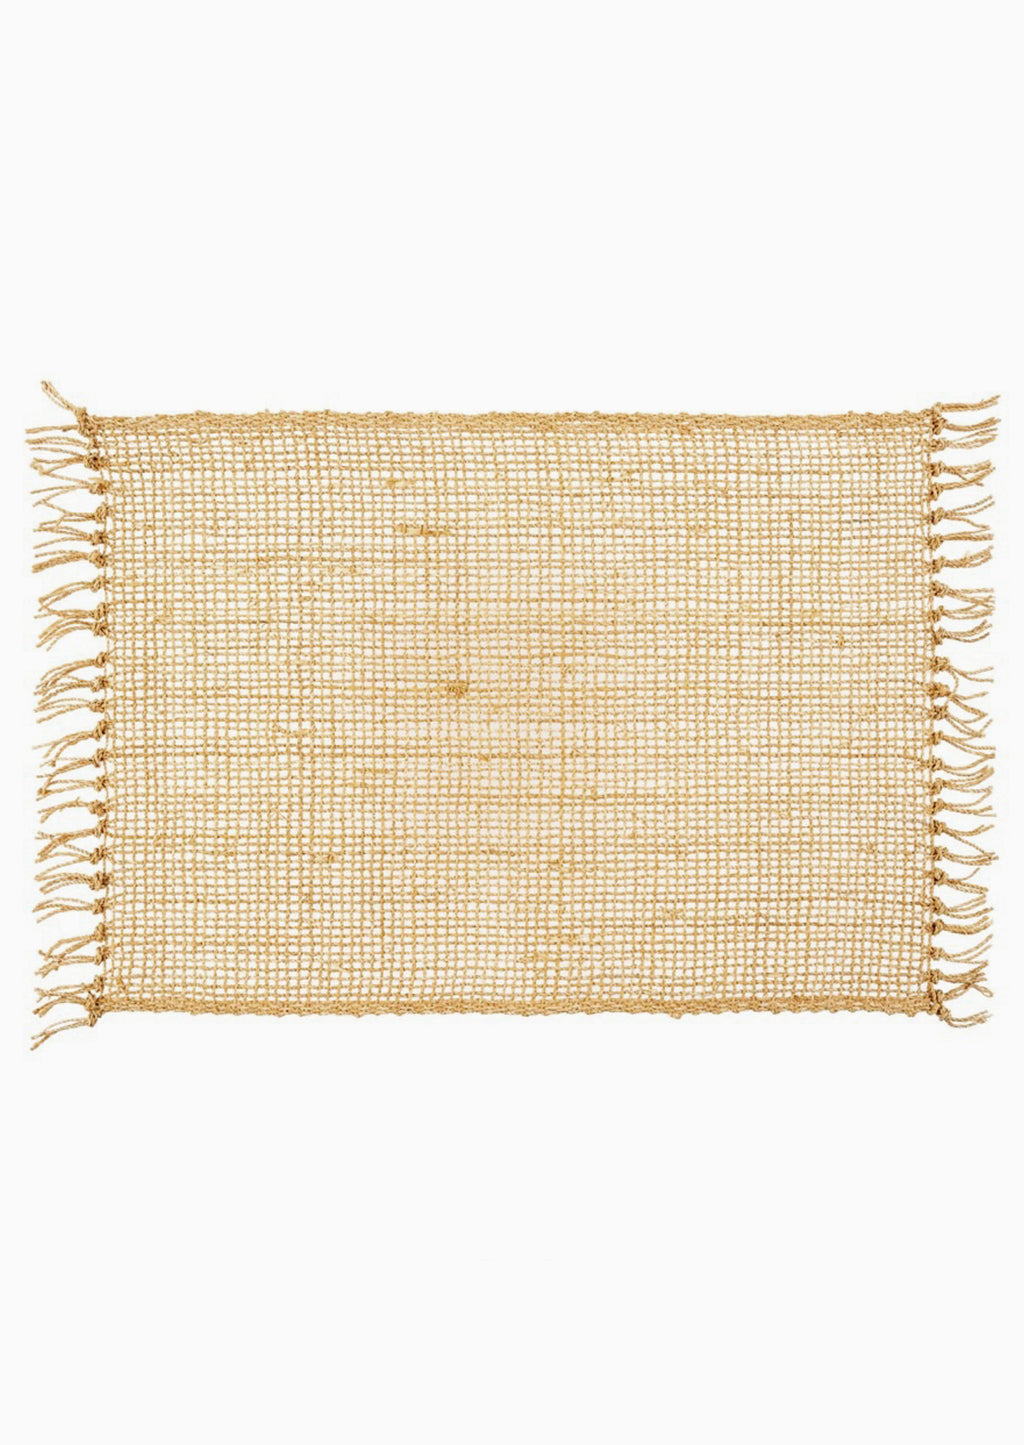 5: A natural woven straw placemat.